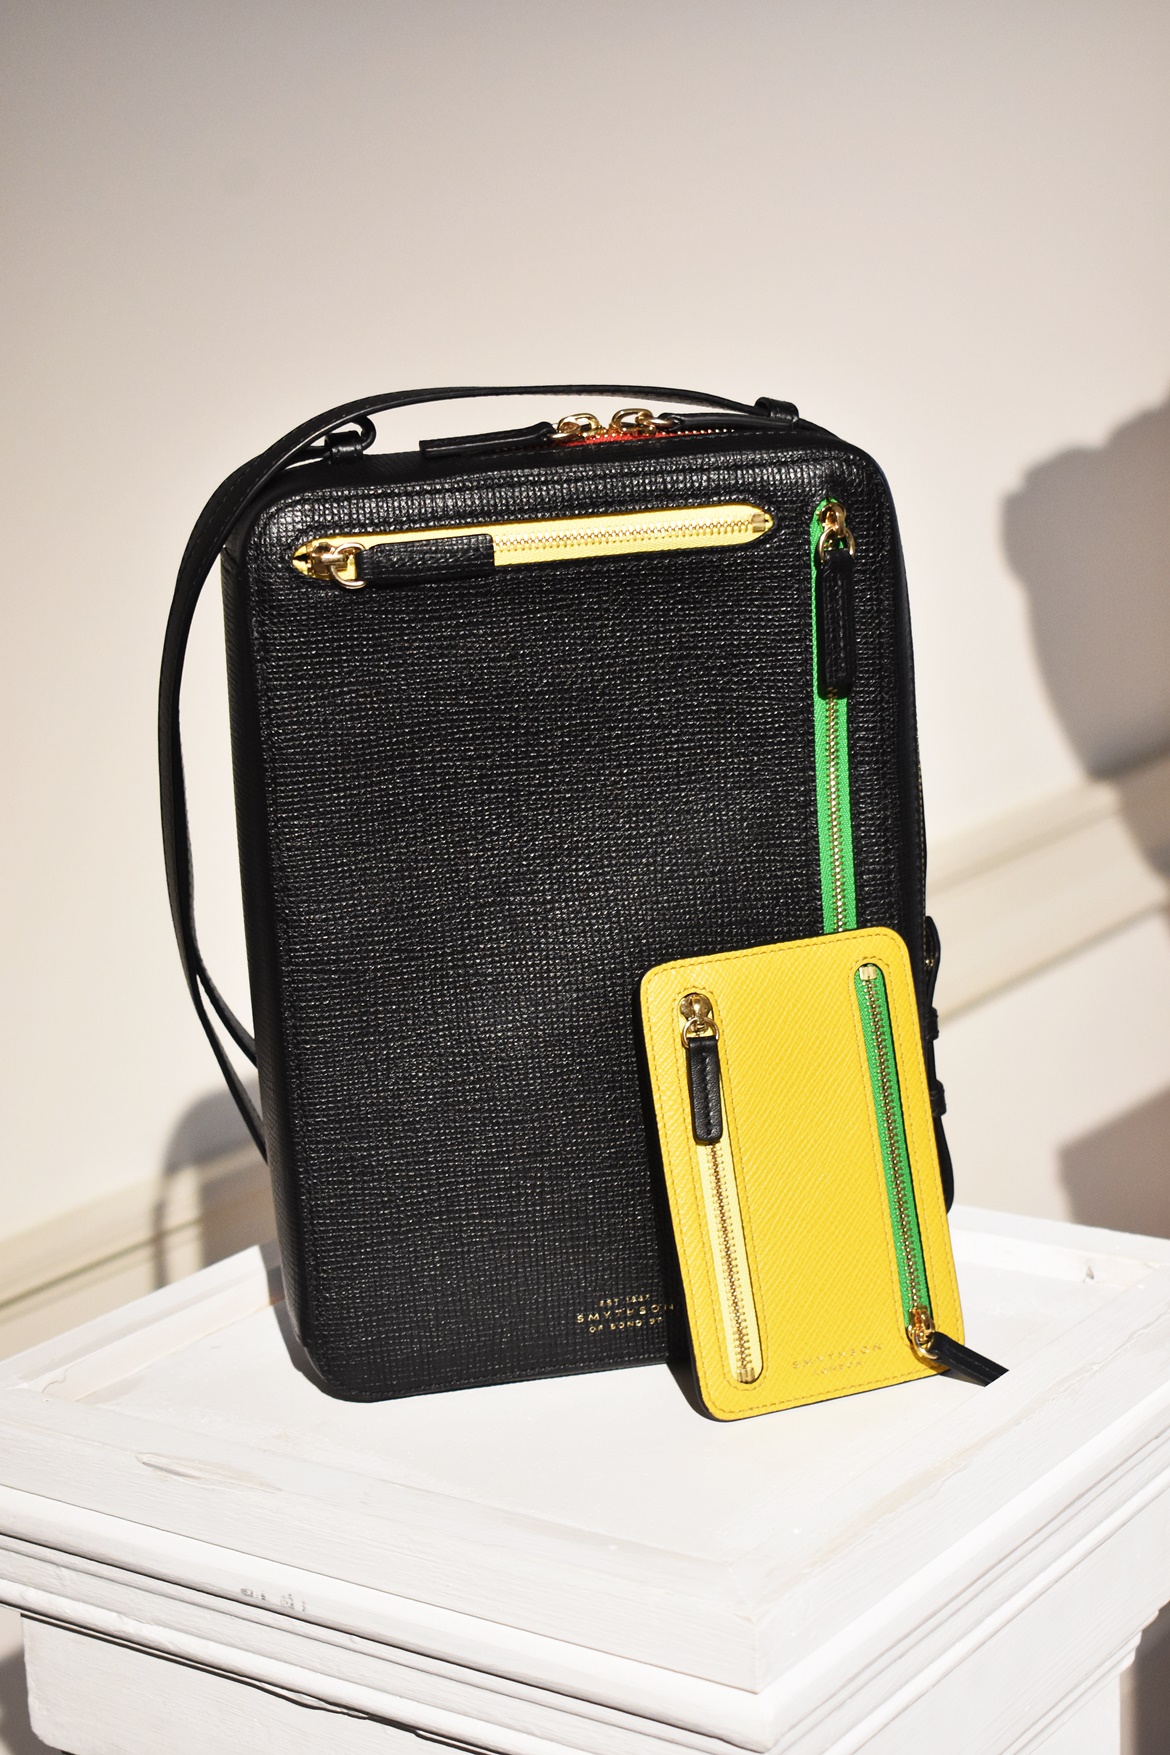 Stationery brand Smythson of Bond Street at Somerset House during LFW February 2019, Think Feel Discover